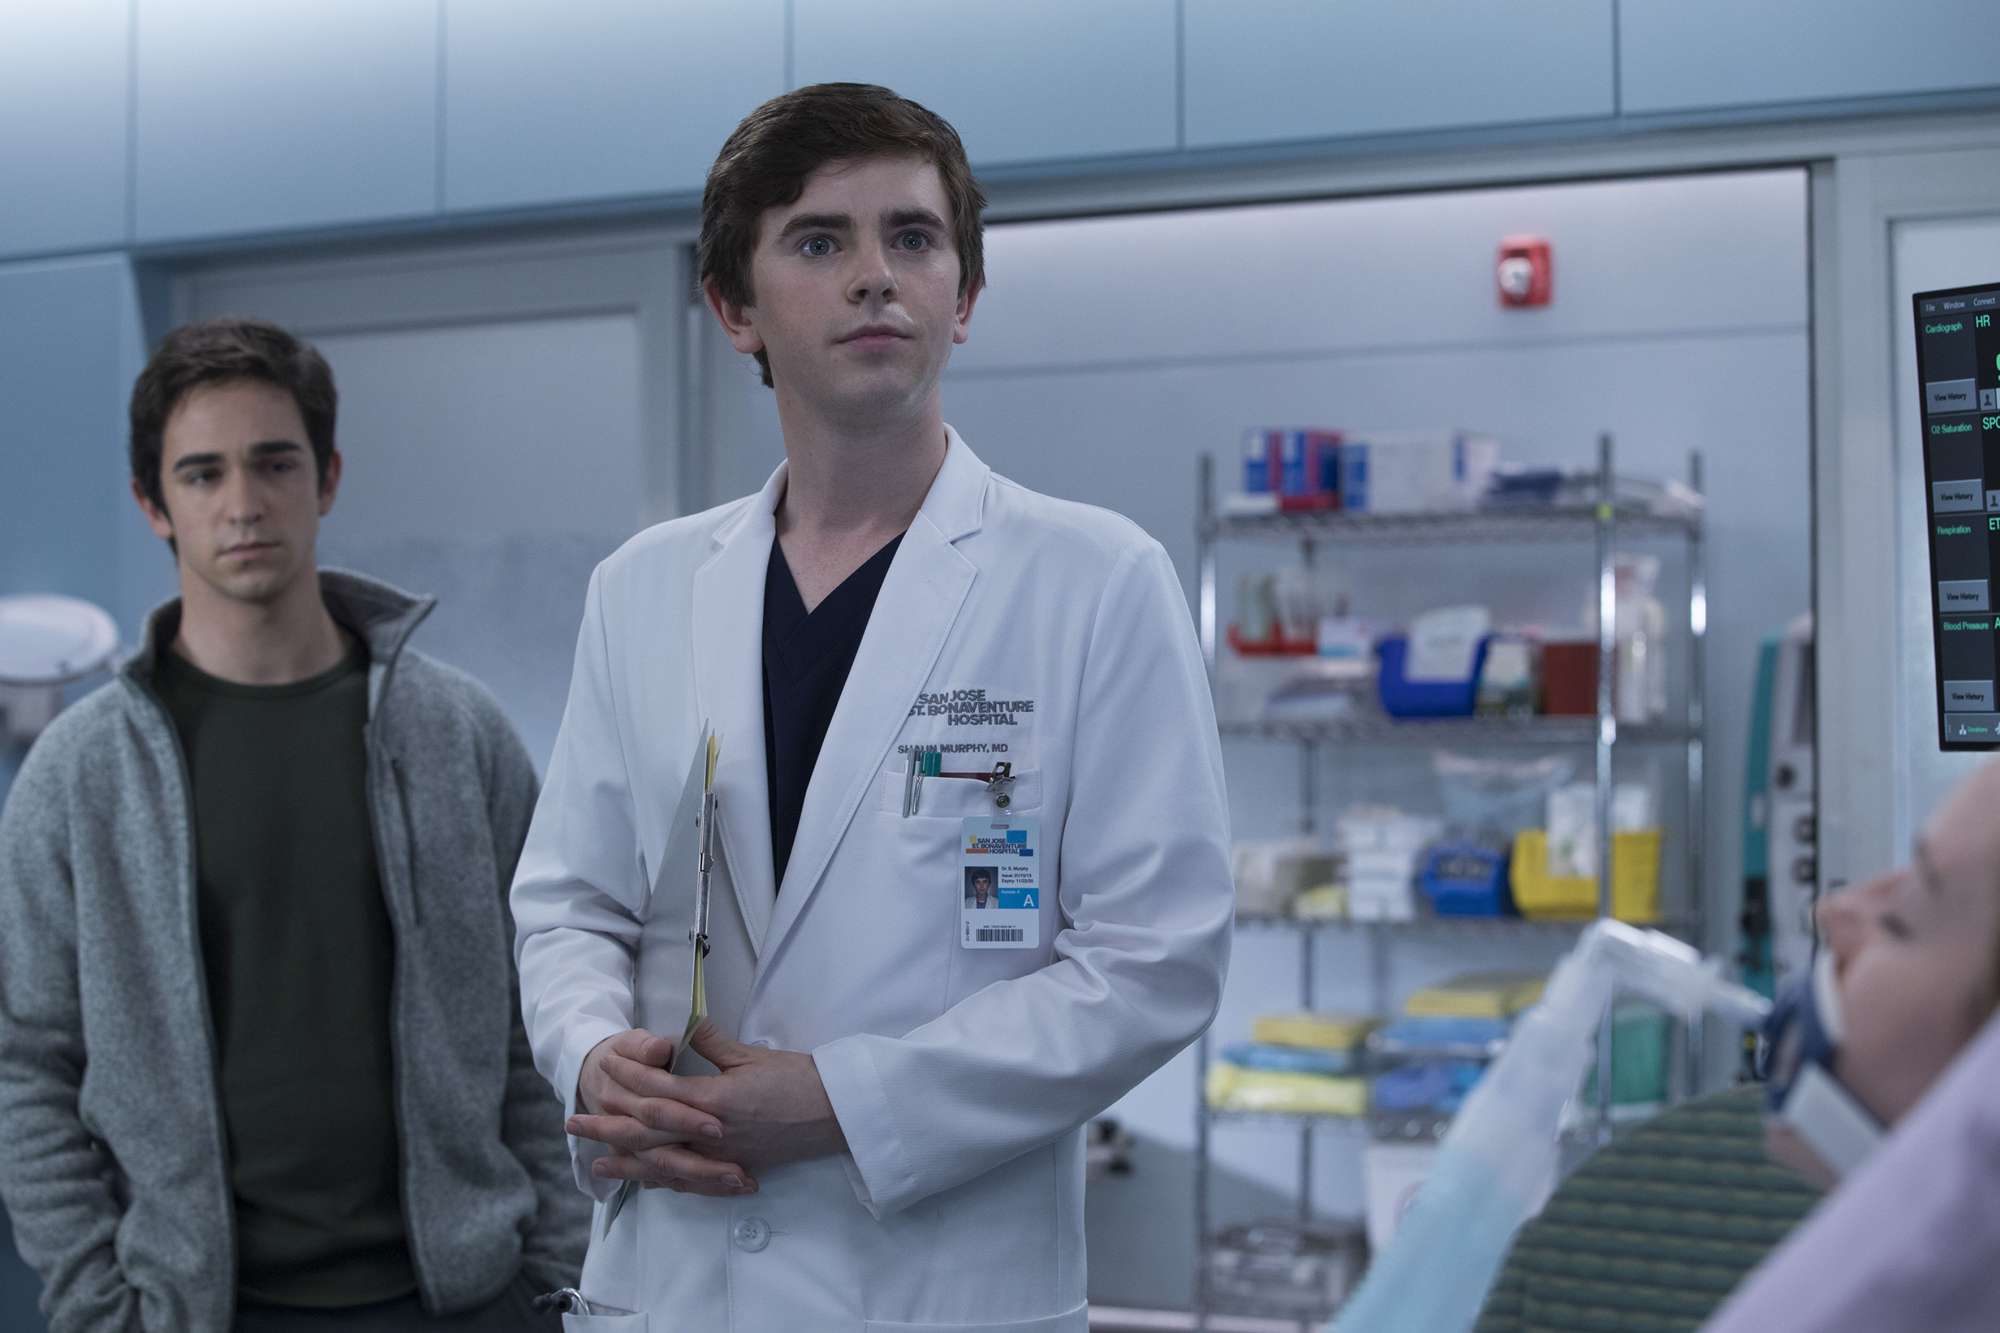 “The Good Doctor”: Shaun Murphy's 5 Best Moments That Made Us Laugh and Cry